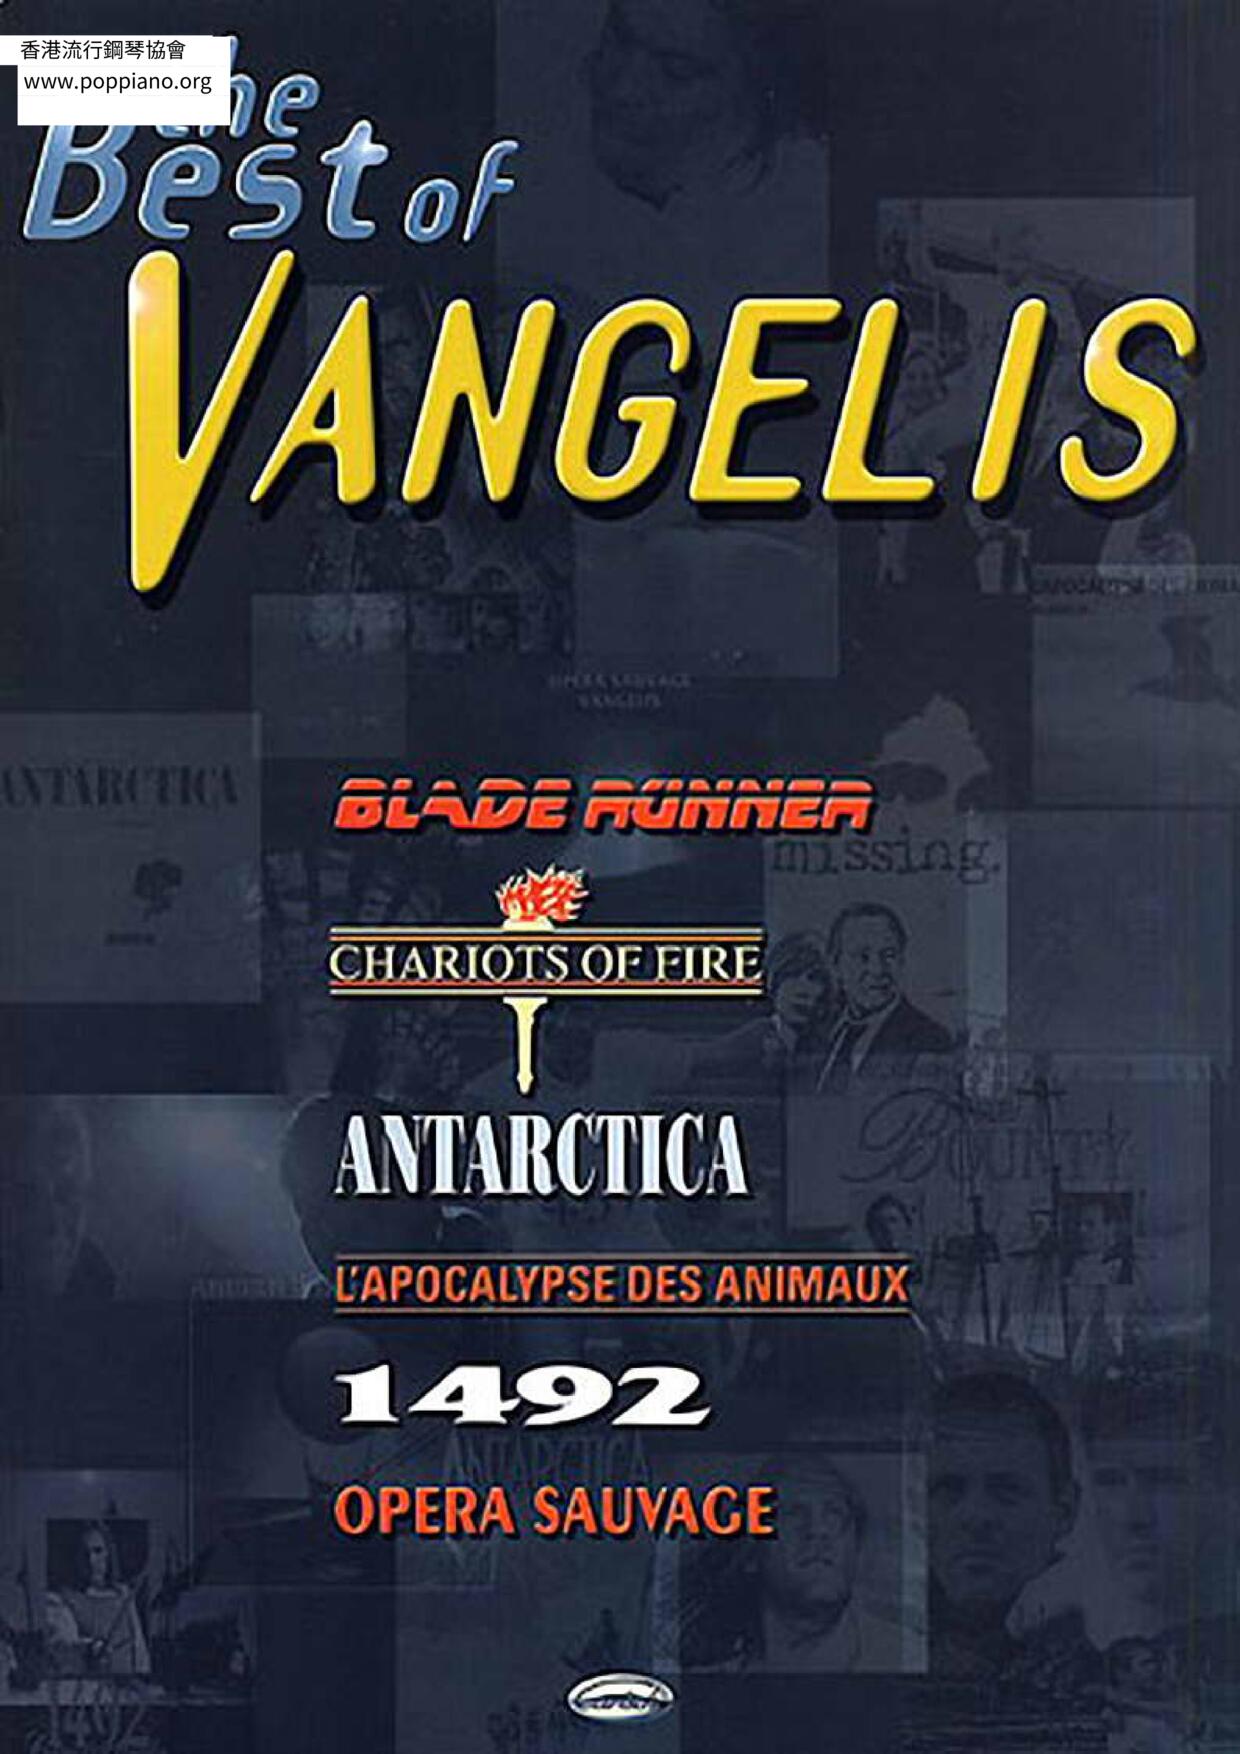 The Best Of Vangelis 57 pages Score